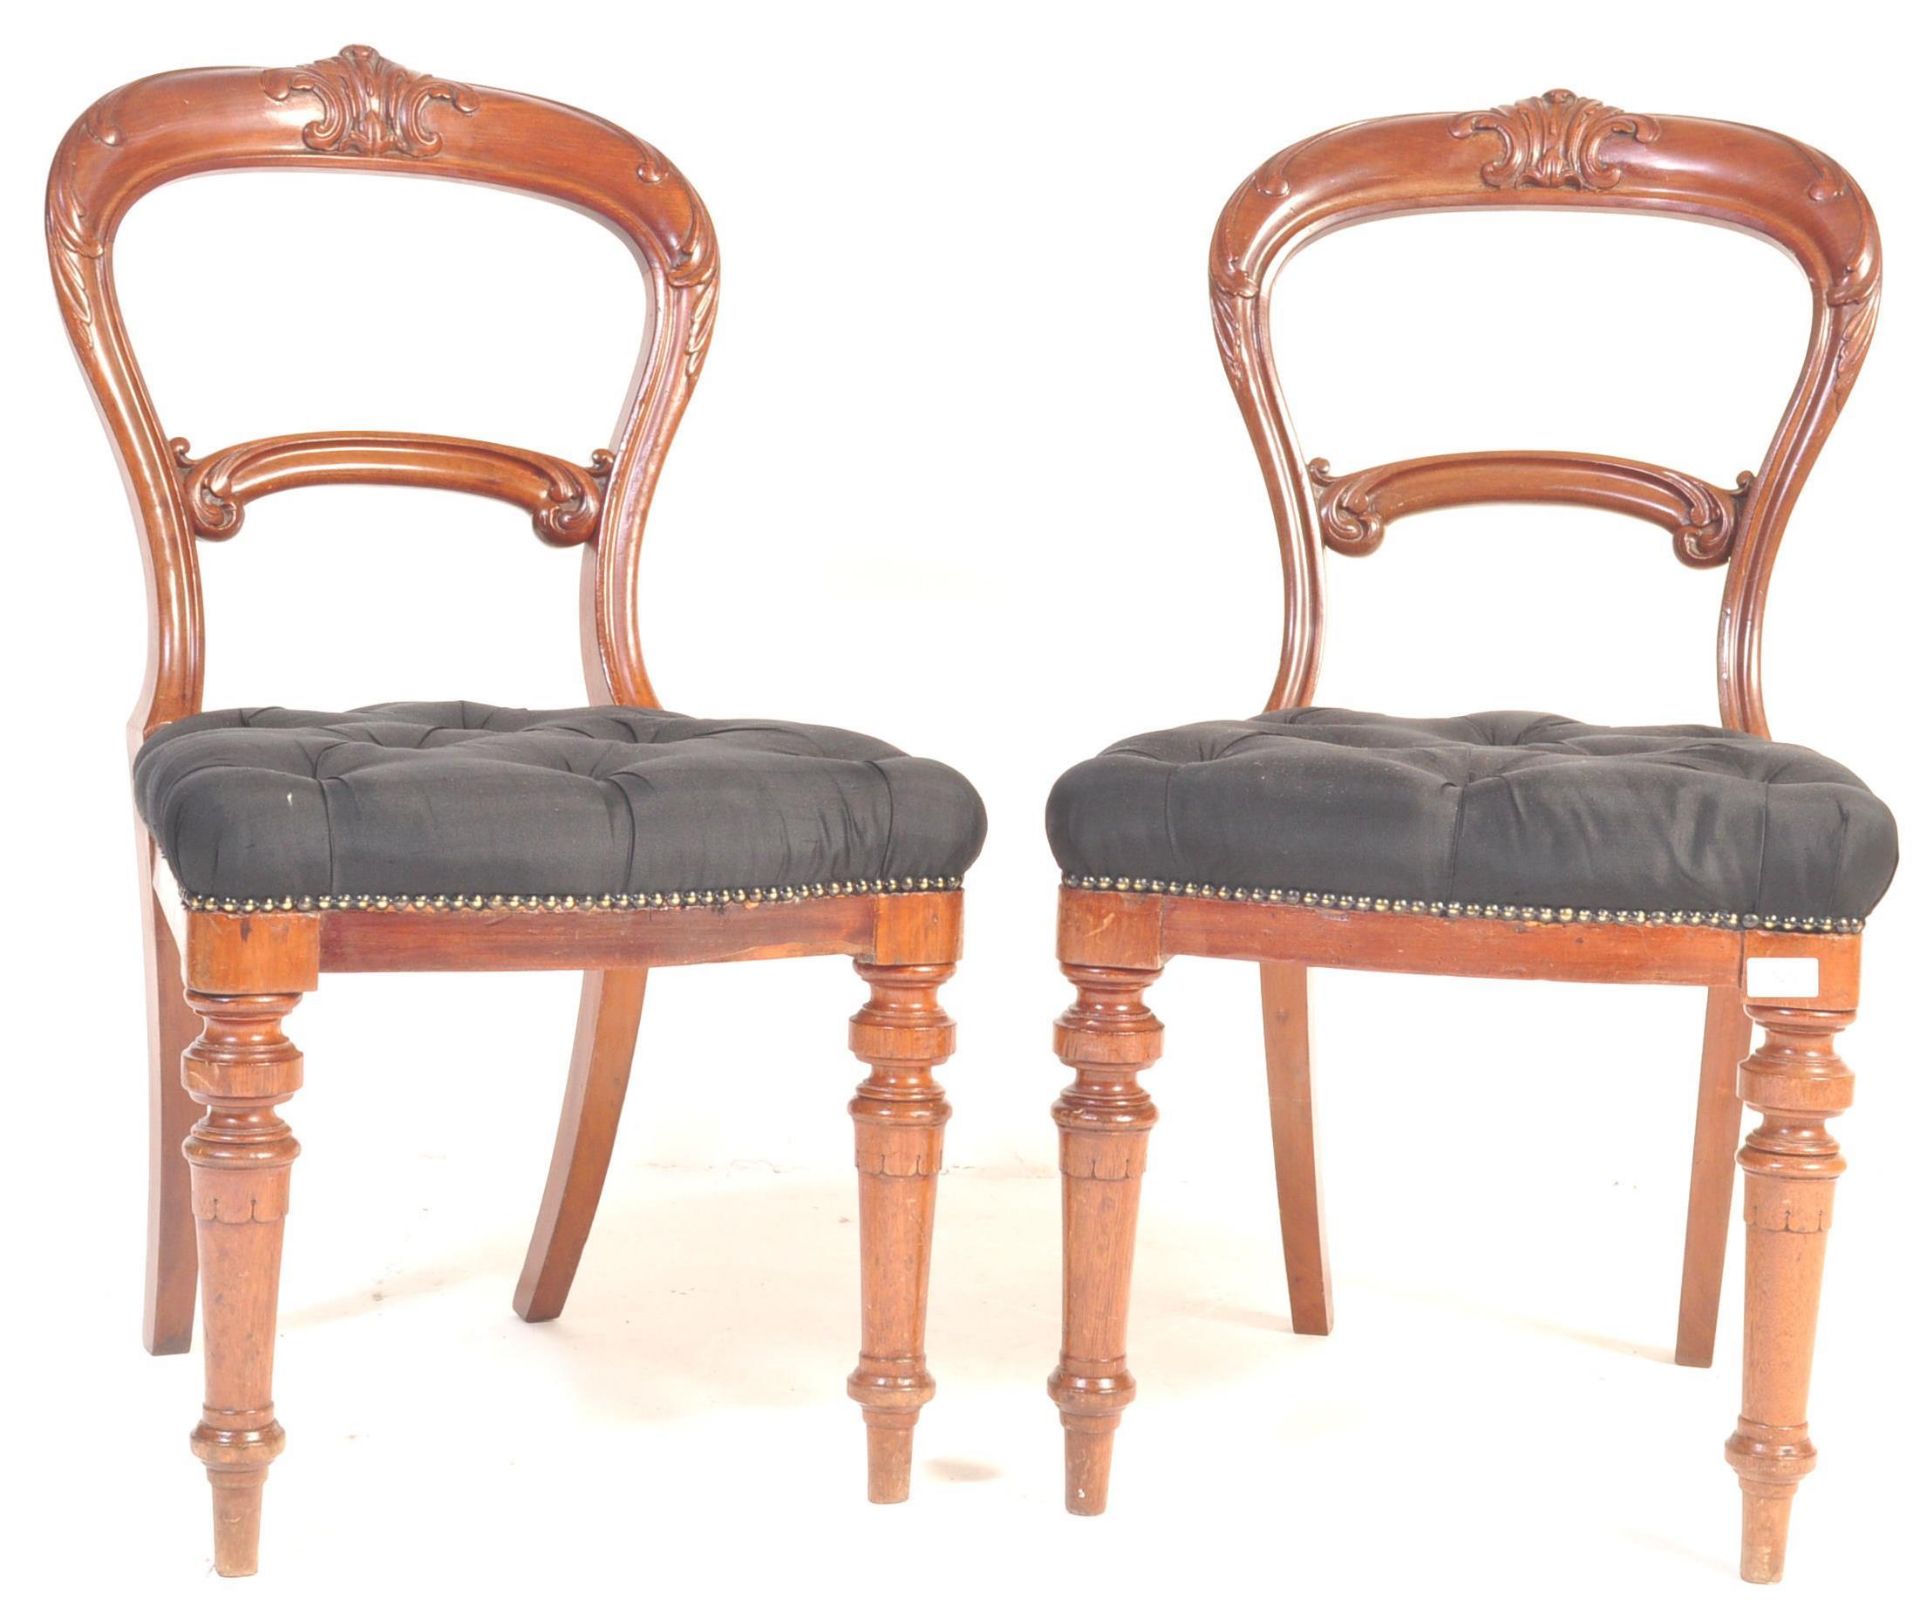 PAIR OF 19TH CENTURY VICTORIAN MAHOGANY DINING CHAIRS - Image 7 of 8